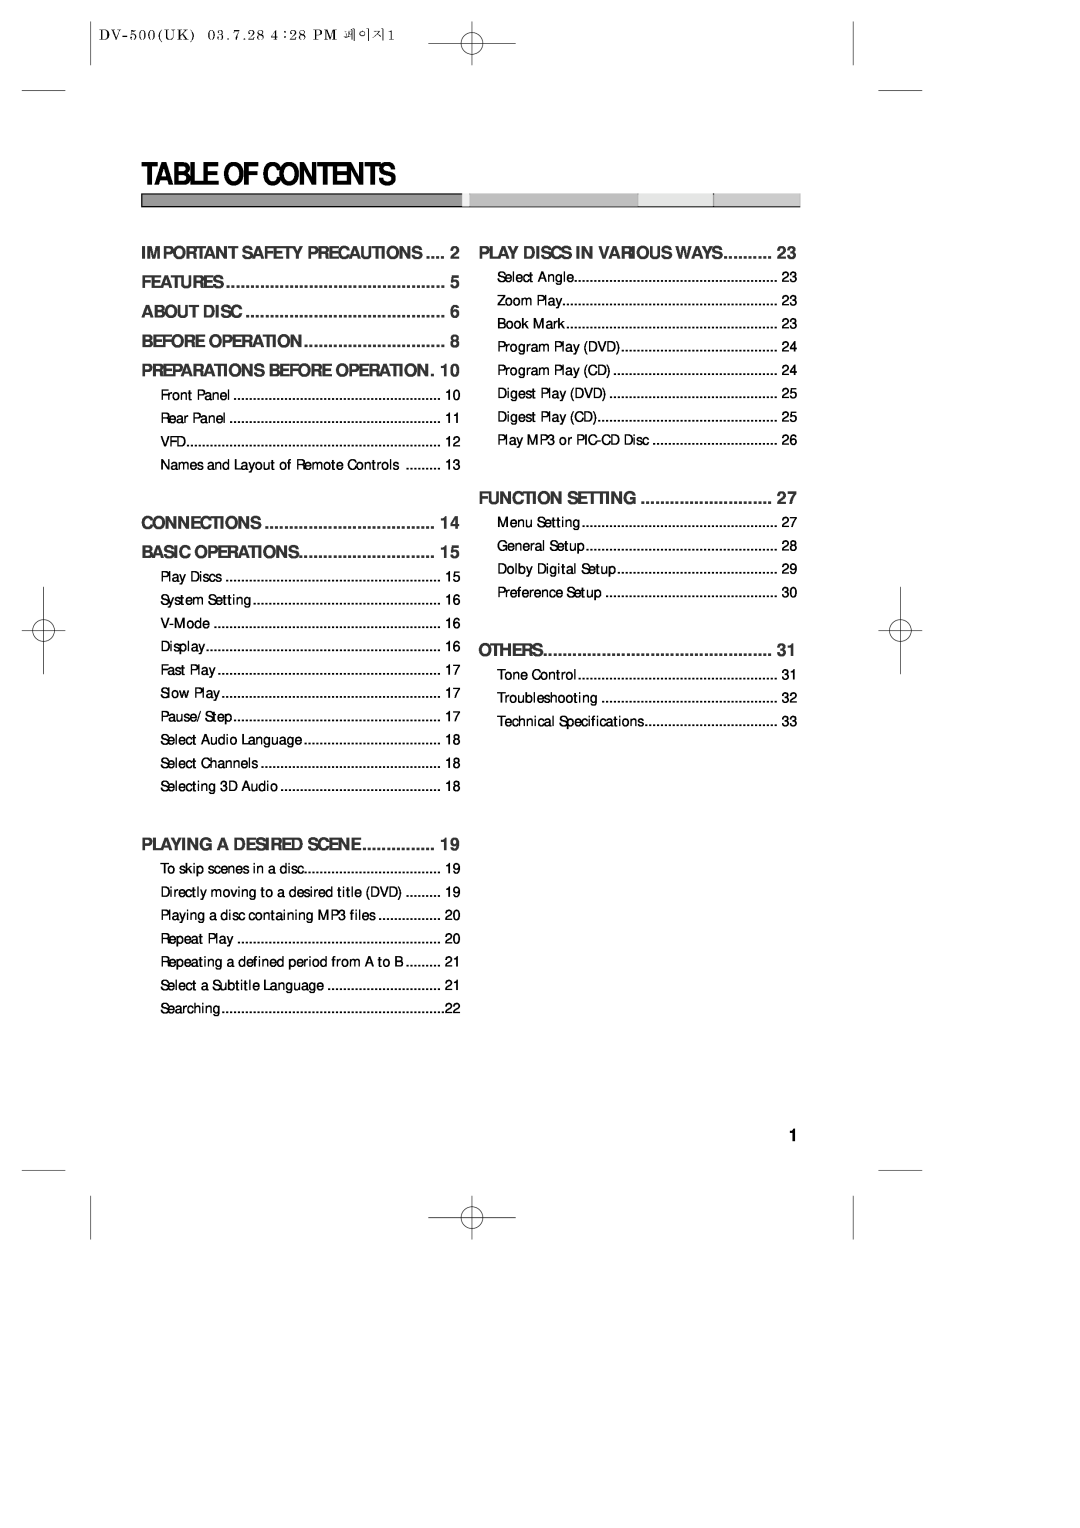 Daewoo DV-500 owner manual Table Of Contents 